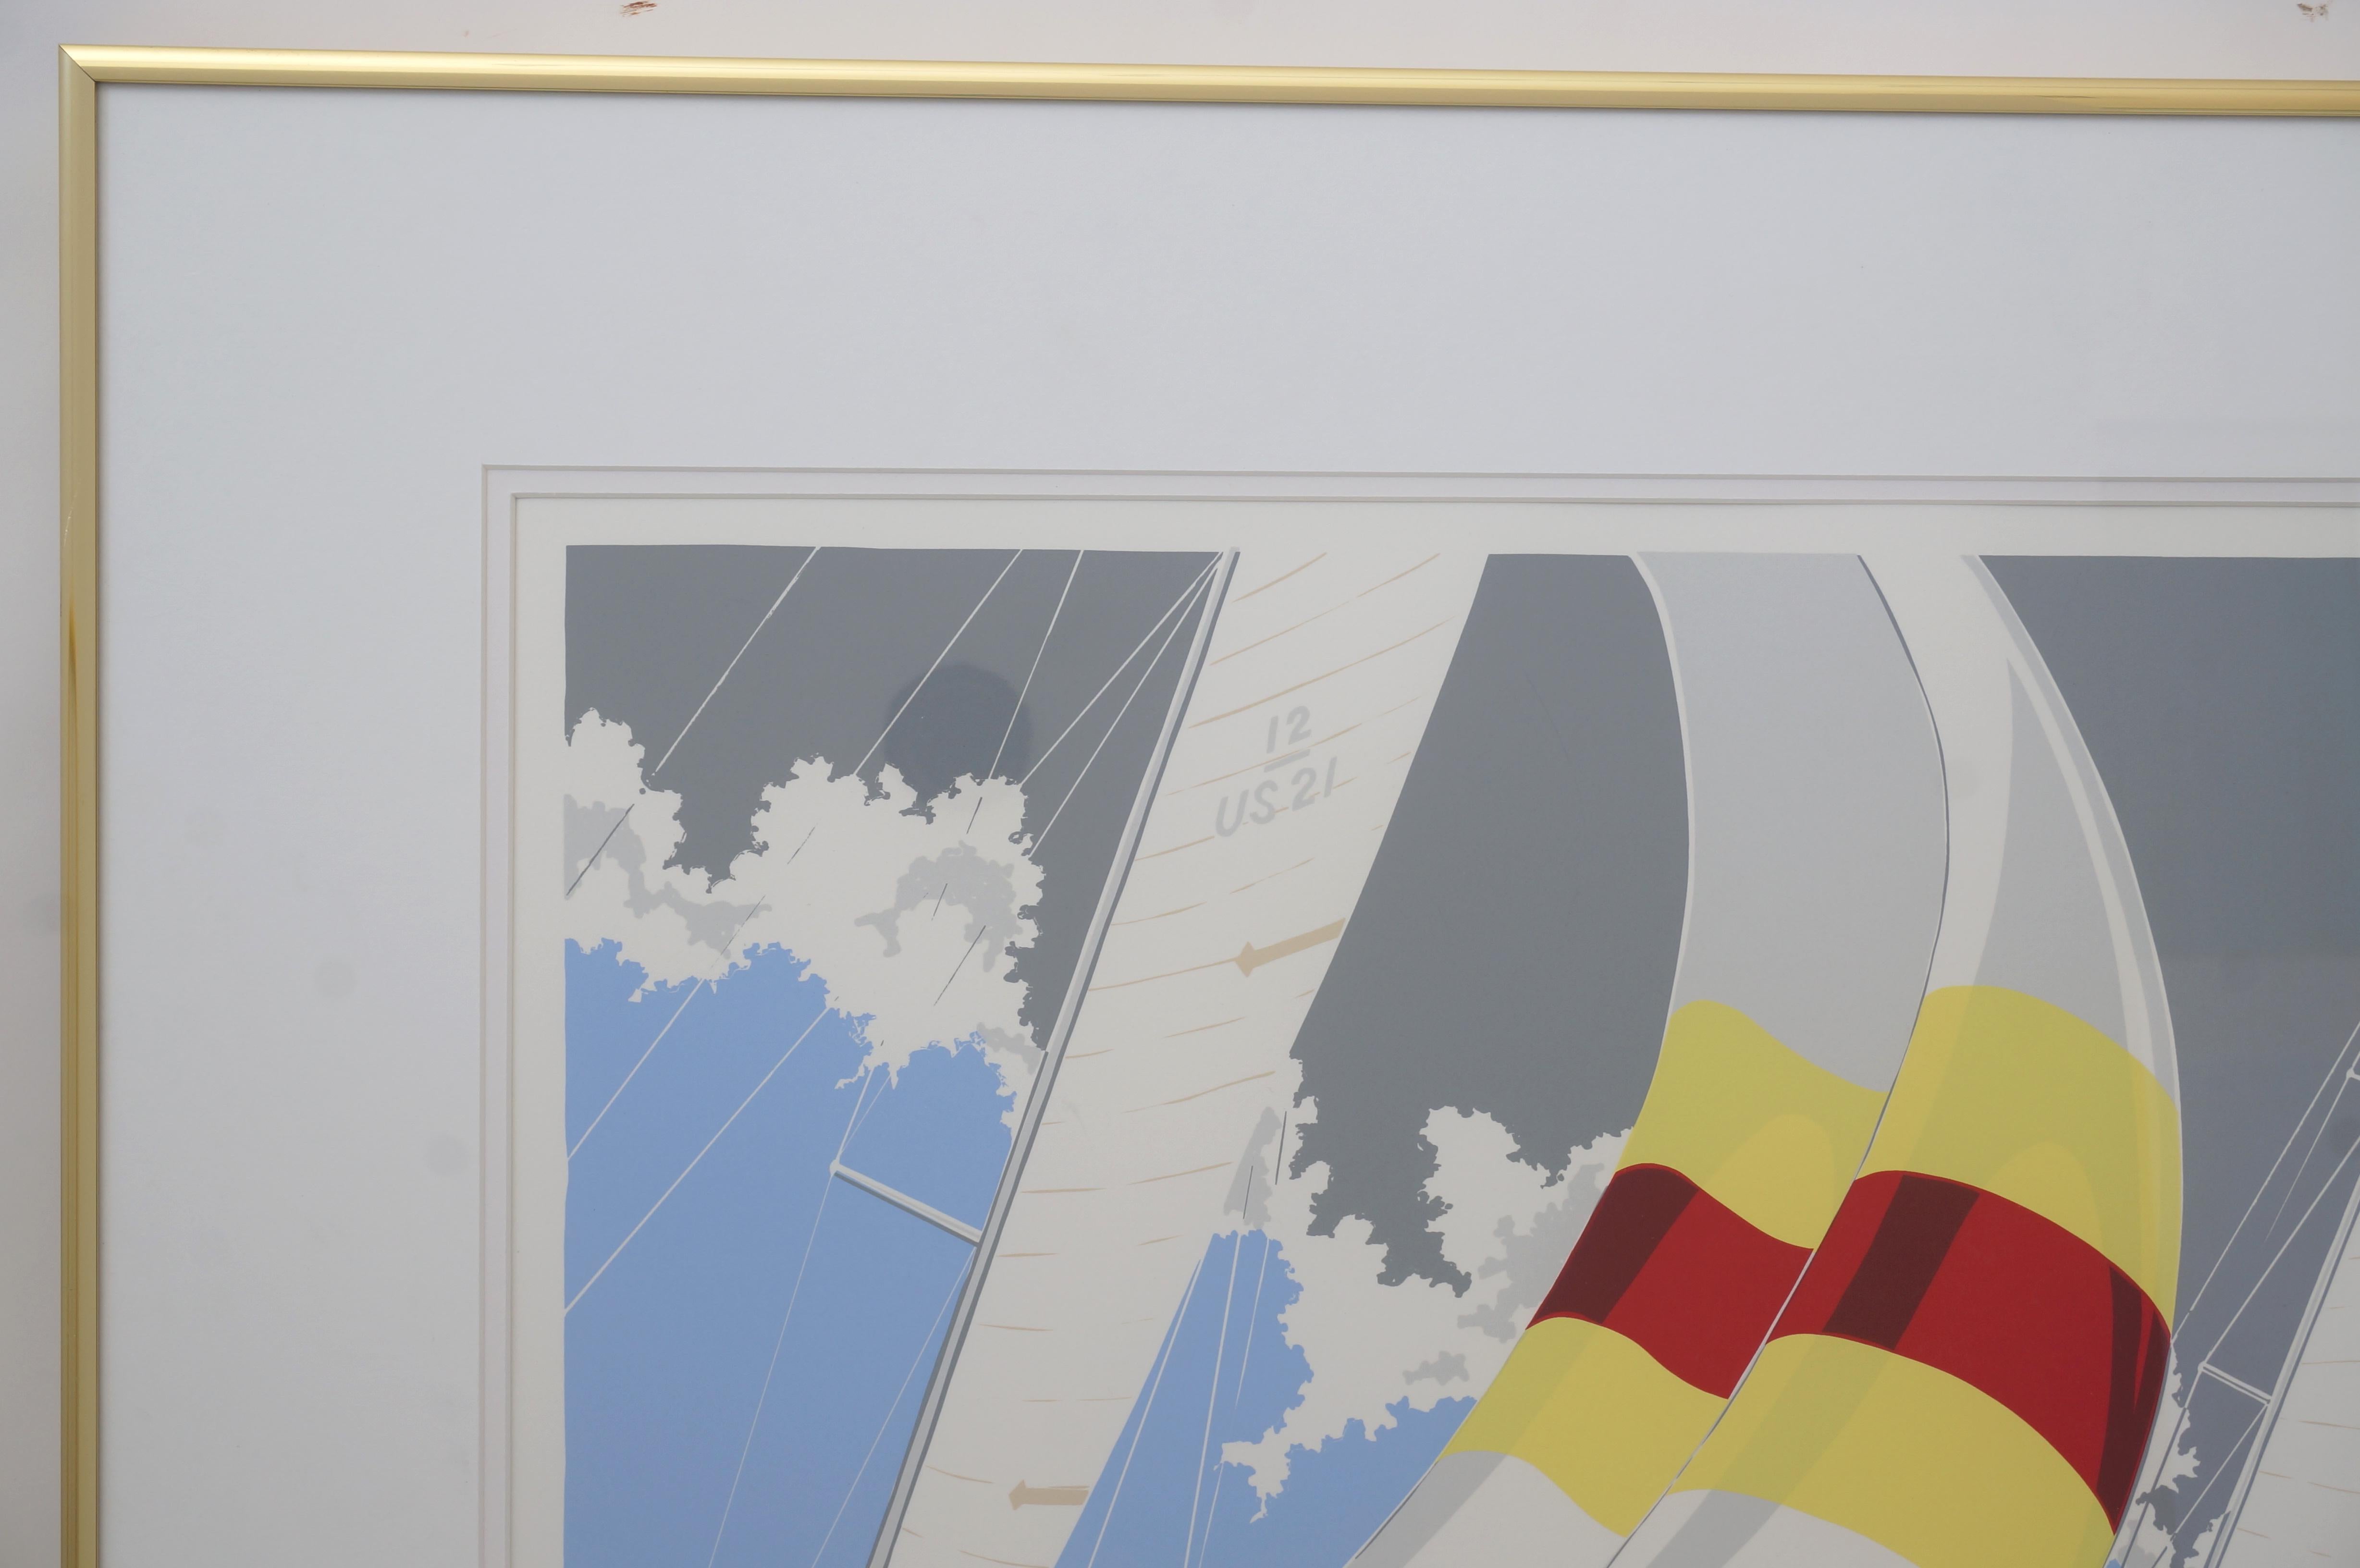 This stylish, limited edition #16/125 serigraph print is titled 